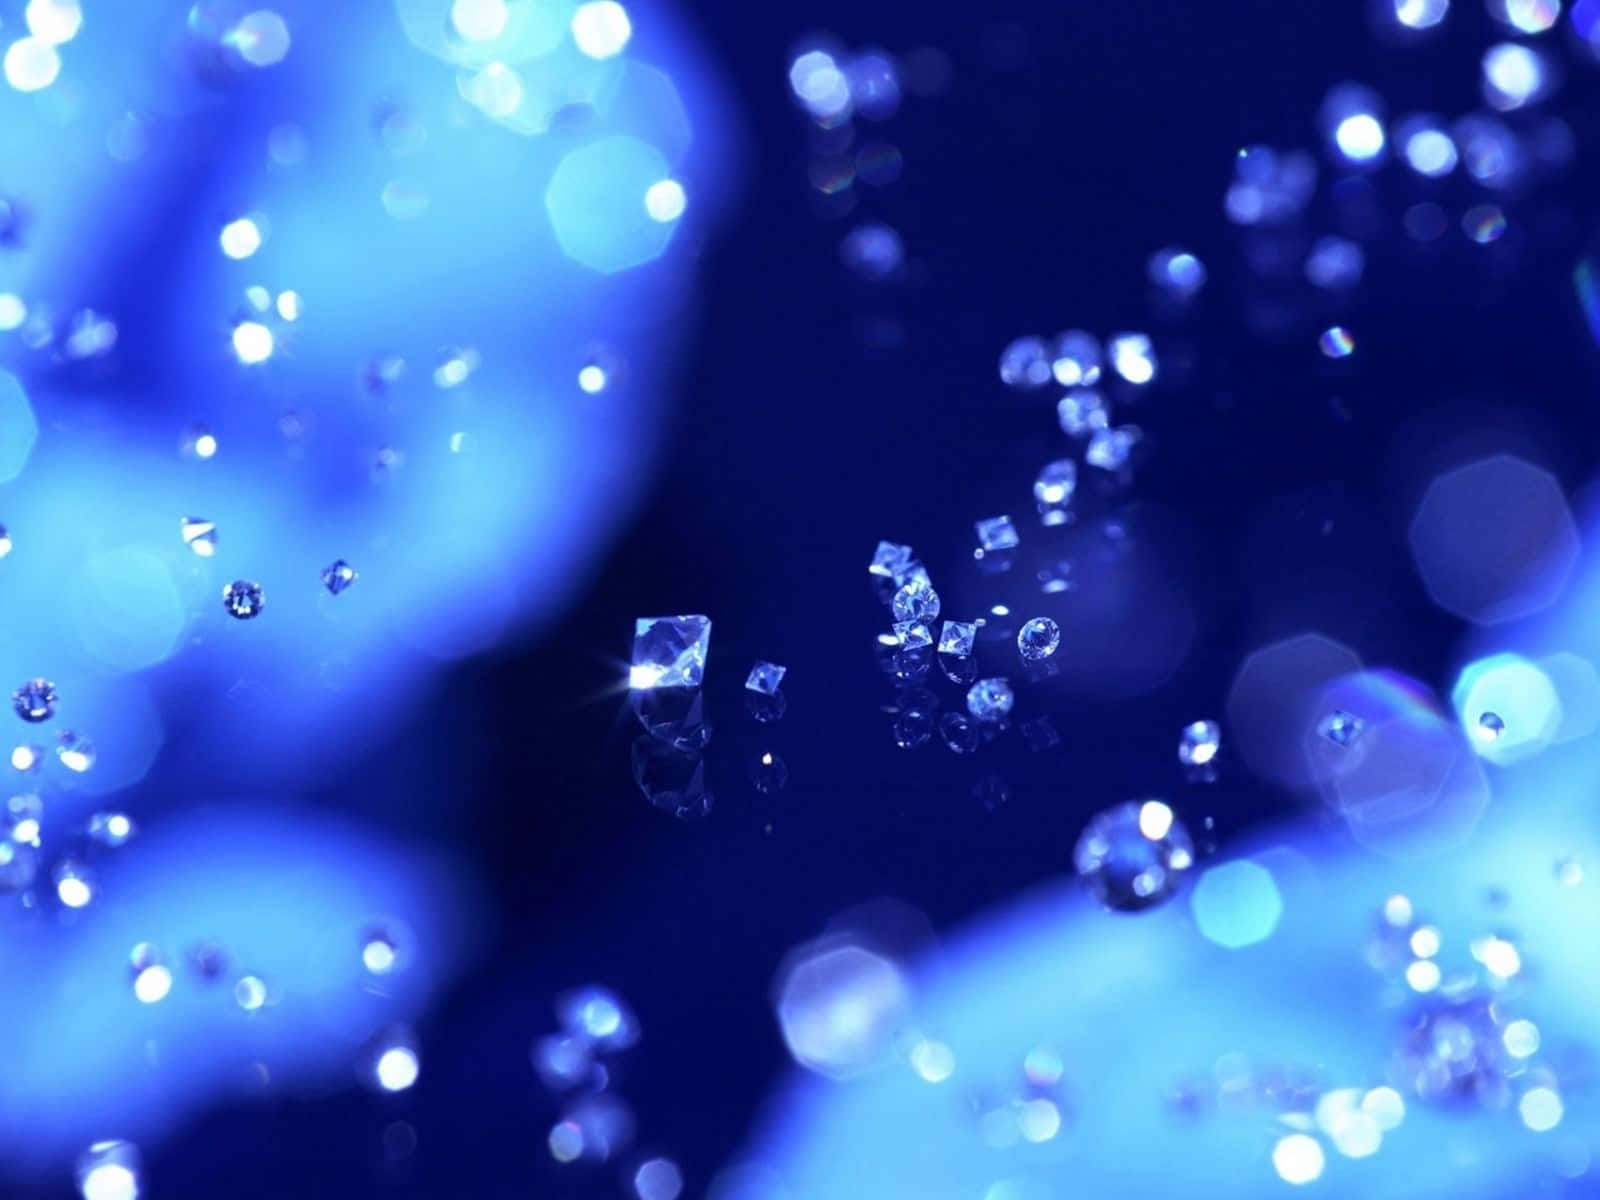 Bejeweled in the bright hue, this sapphire blue harkens to the rich beauty of the night sky. Wallpaper